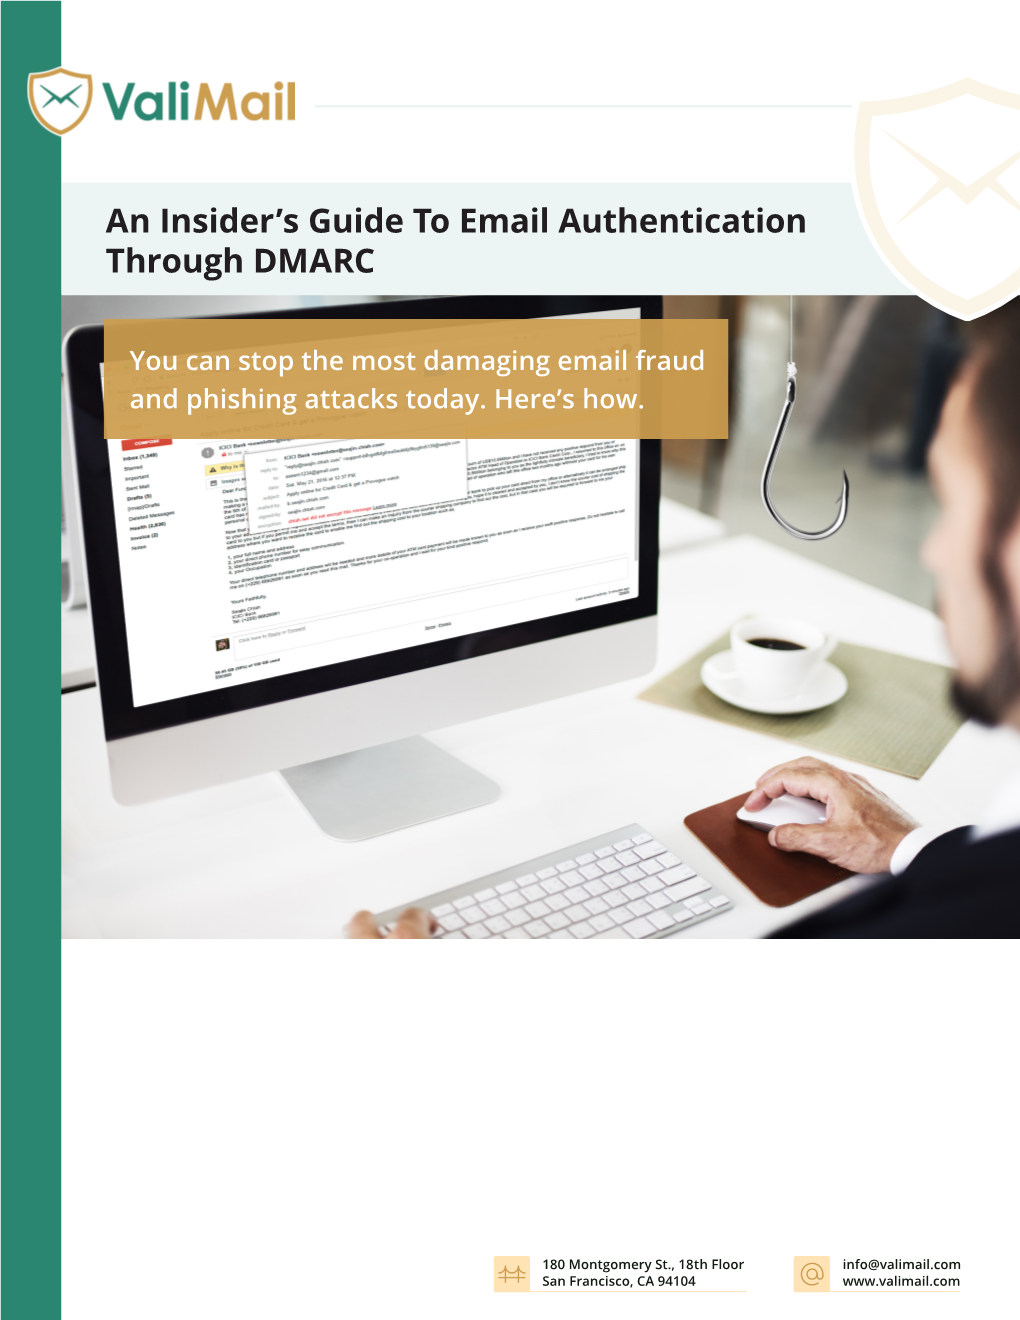 An Insider's Guide to Email Authentication Through DMARC